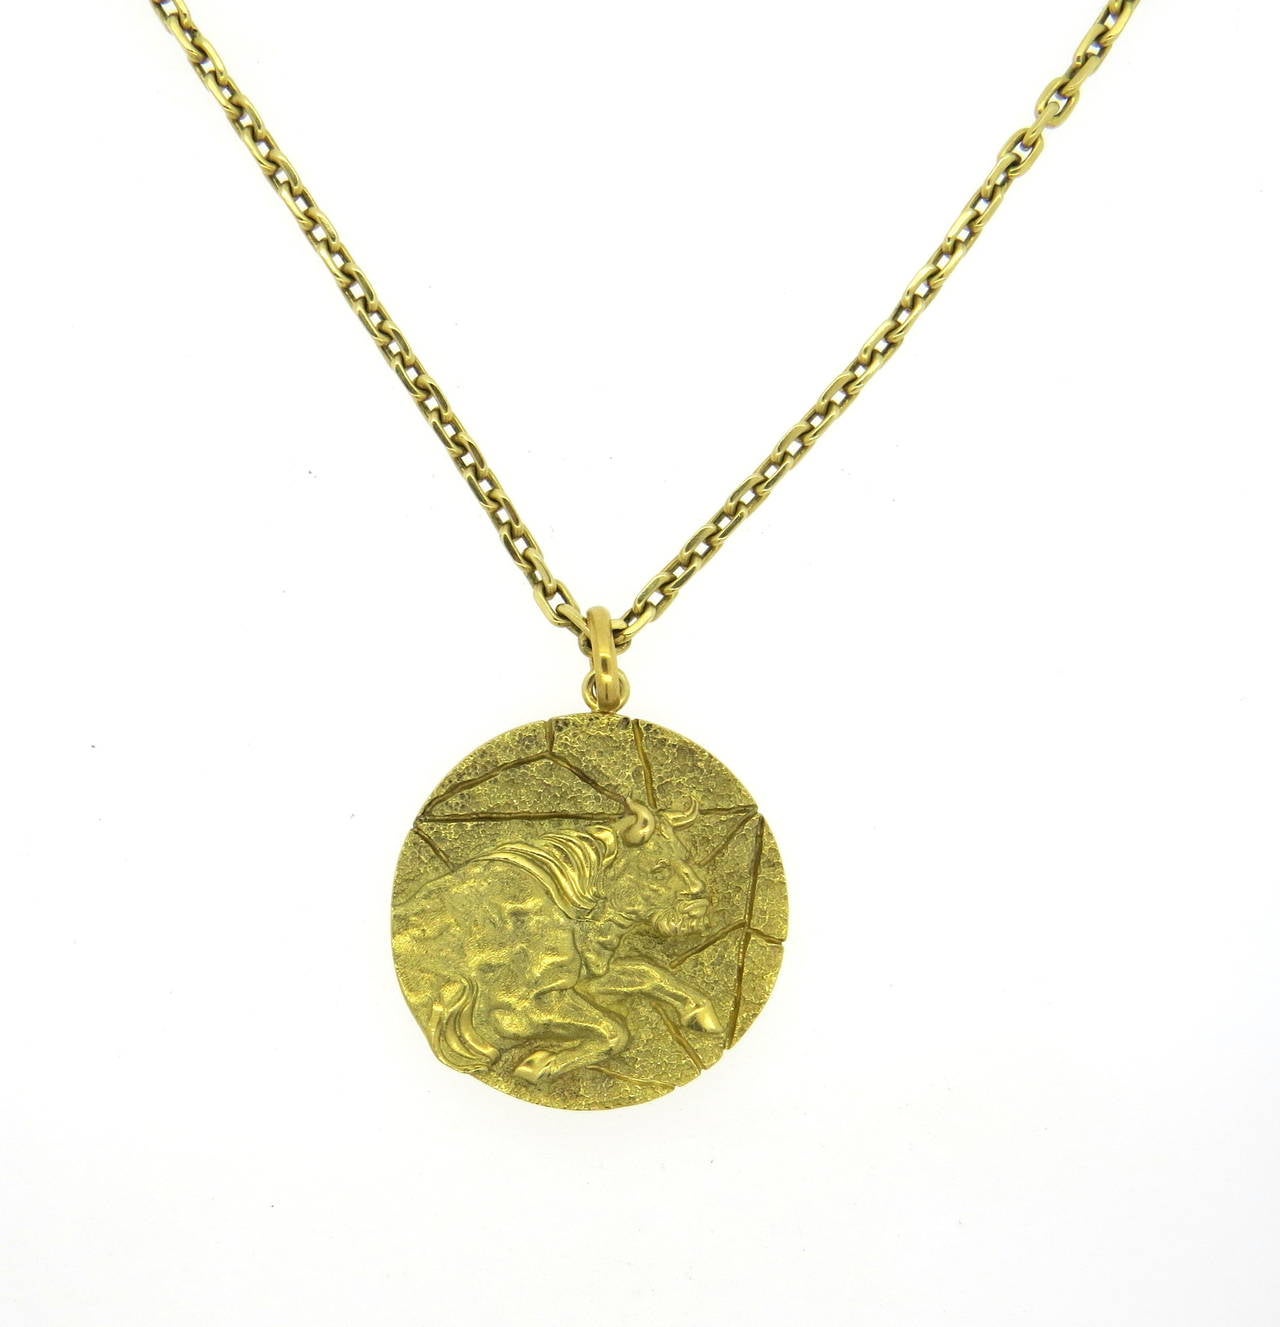 An 18k yellow gold necklace depicting a Taurus Zodiac symbol.  Crafted by Tiffany & Co, the necklace measures 25.5